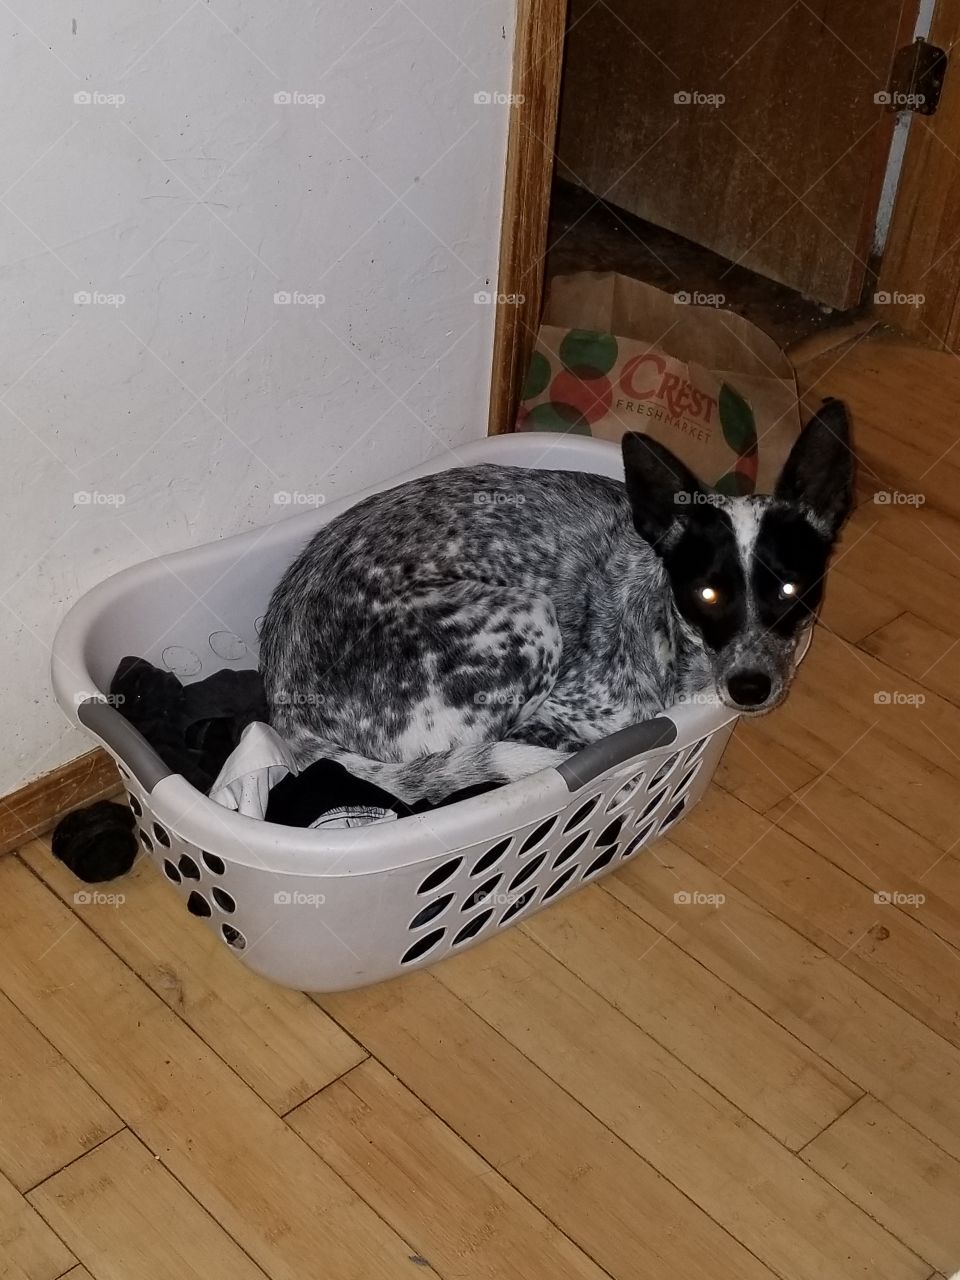 Blossom sitting in the laundry basket